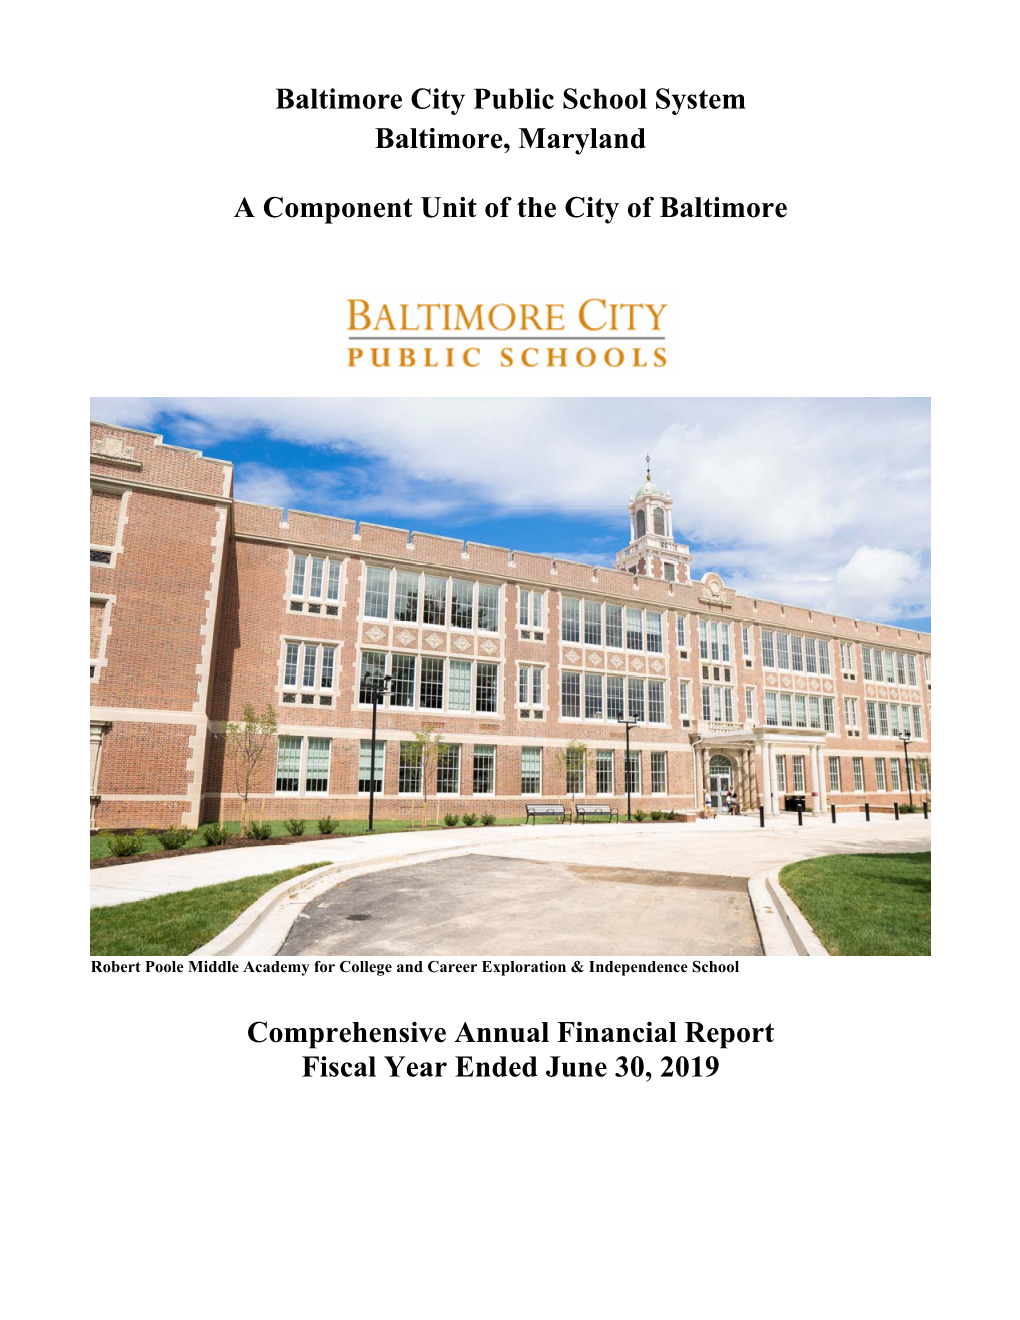 Comprehensive Annual Financial Report Fiscal Year Ended June 30, 2019